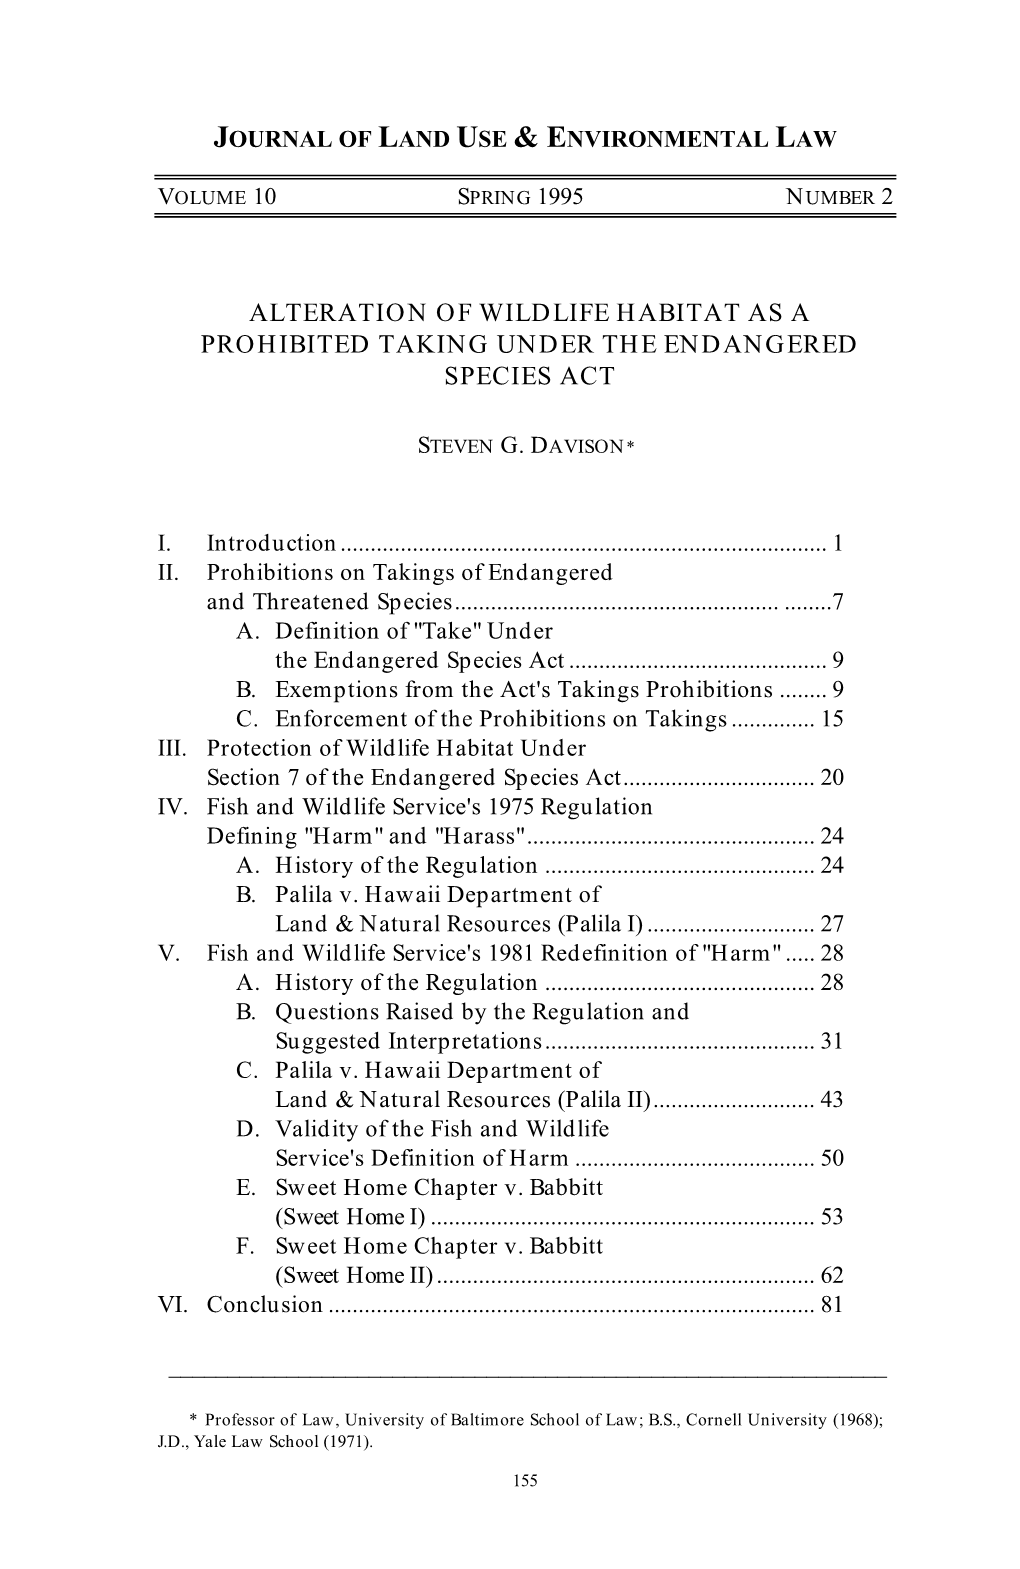 Alteration of Wildlife Habitat As a Prohibited Taking Under the Endangered Species Act